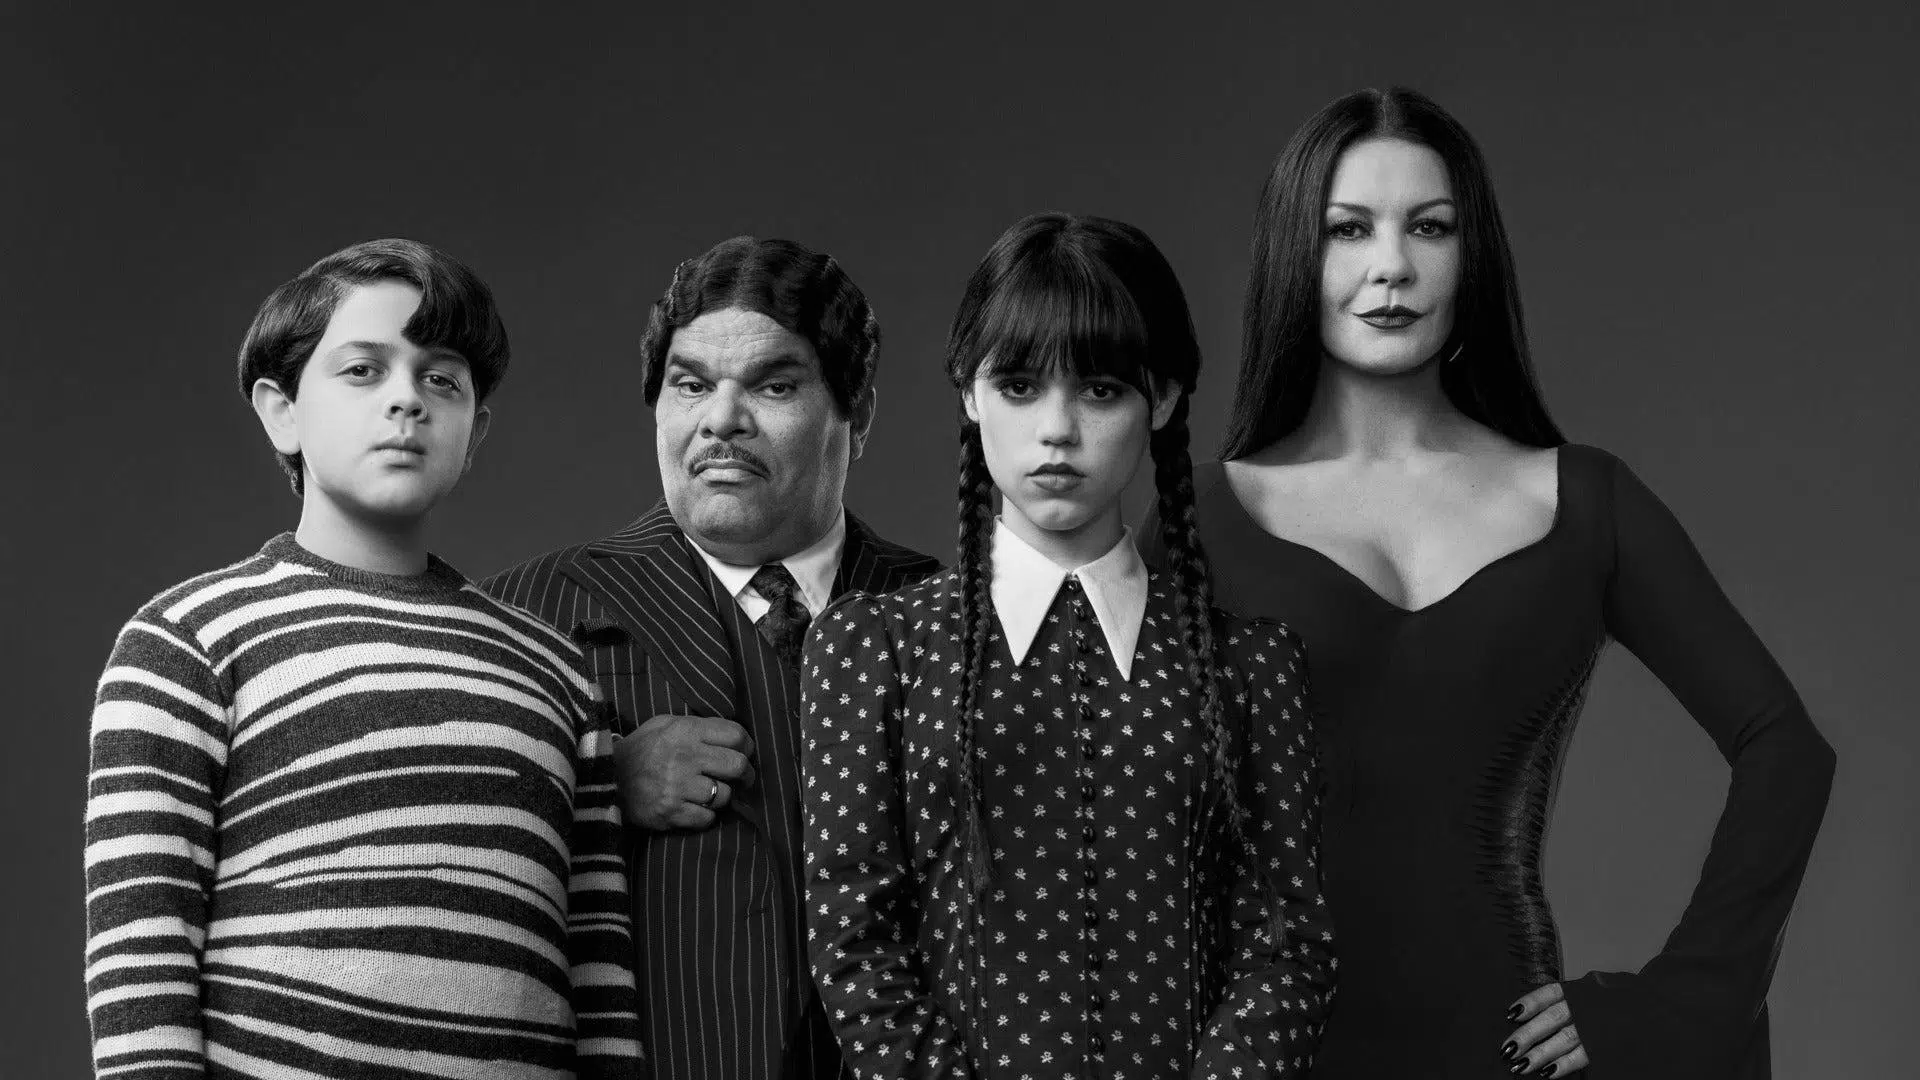 Netflix Gives Us Our First Look at New Addams Family in "Wednesday"